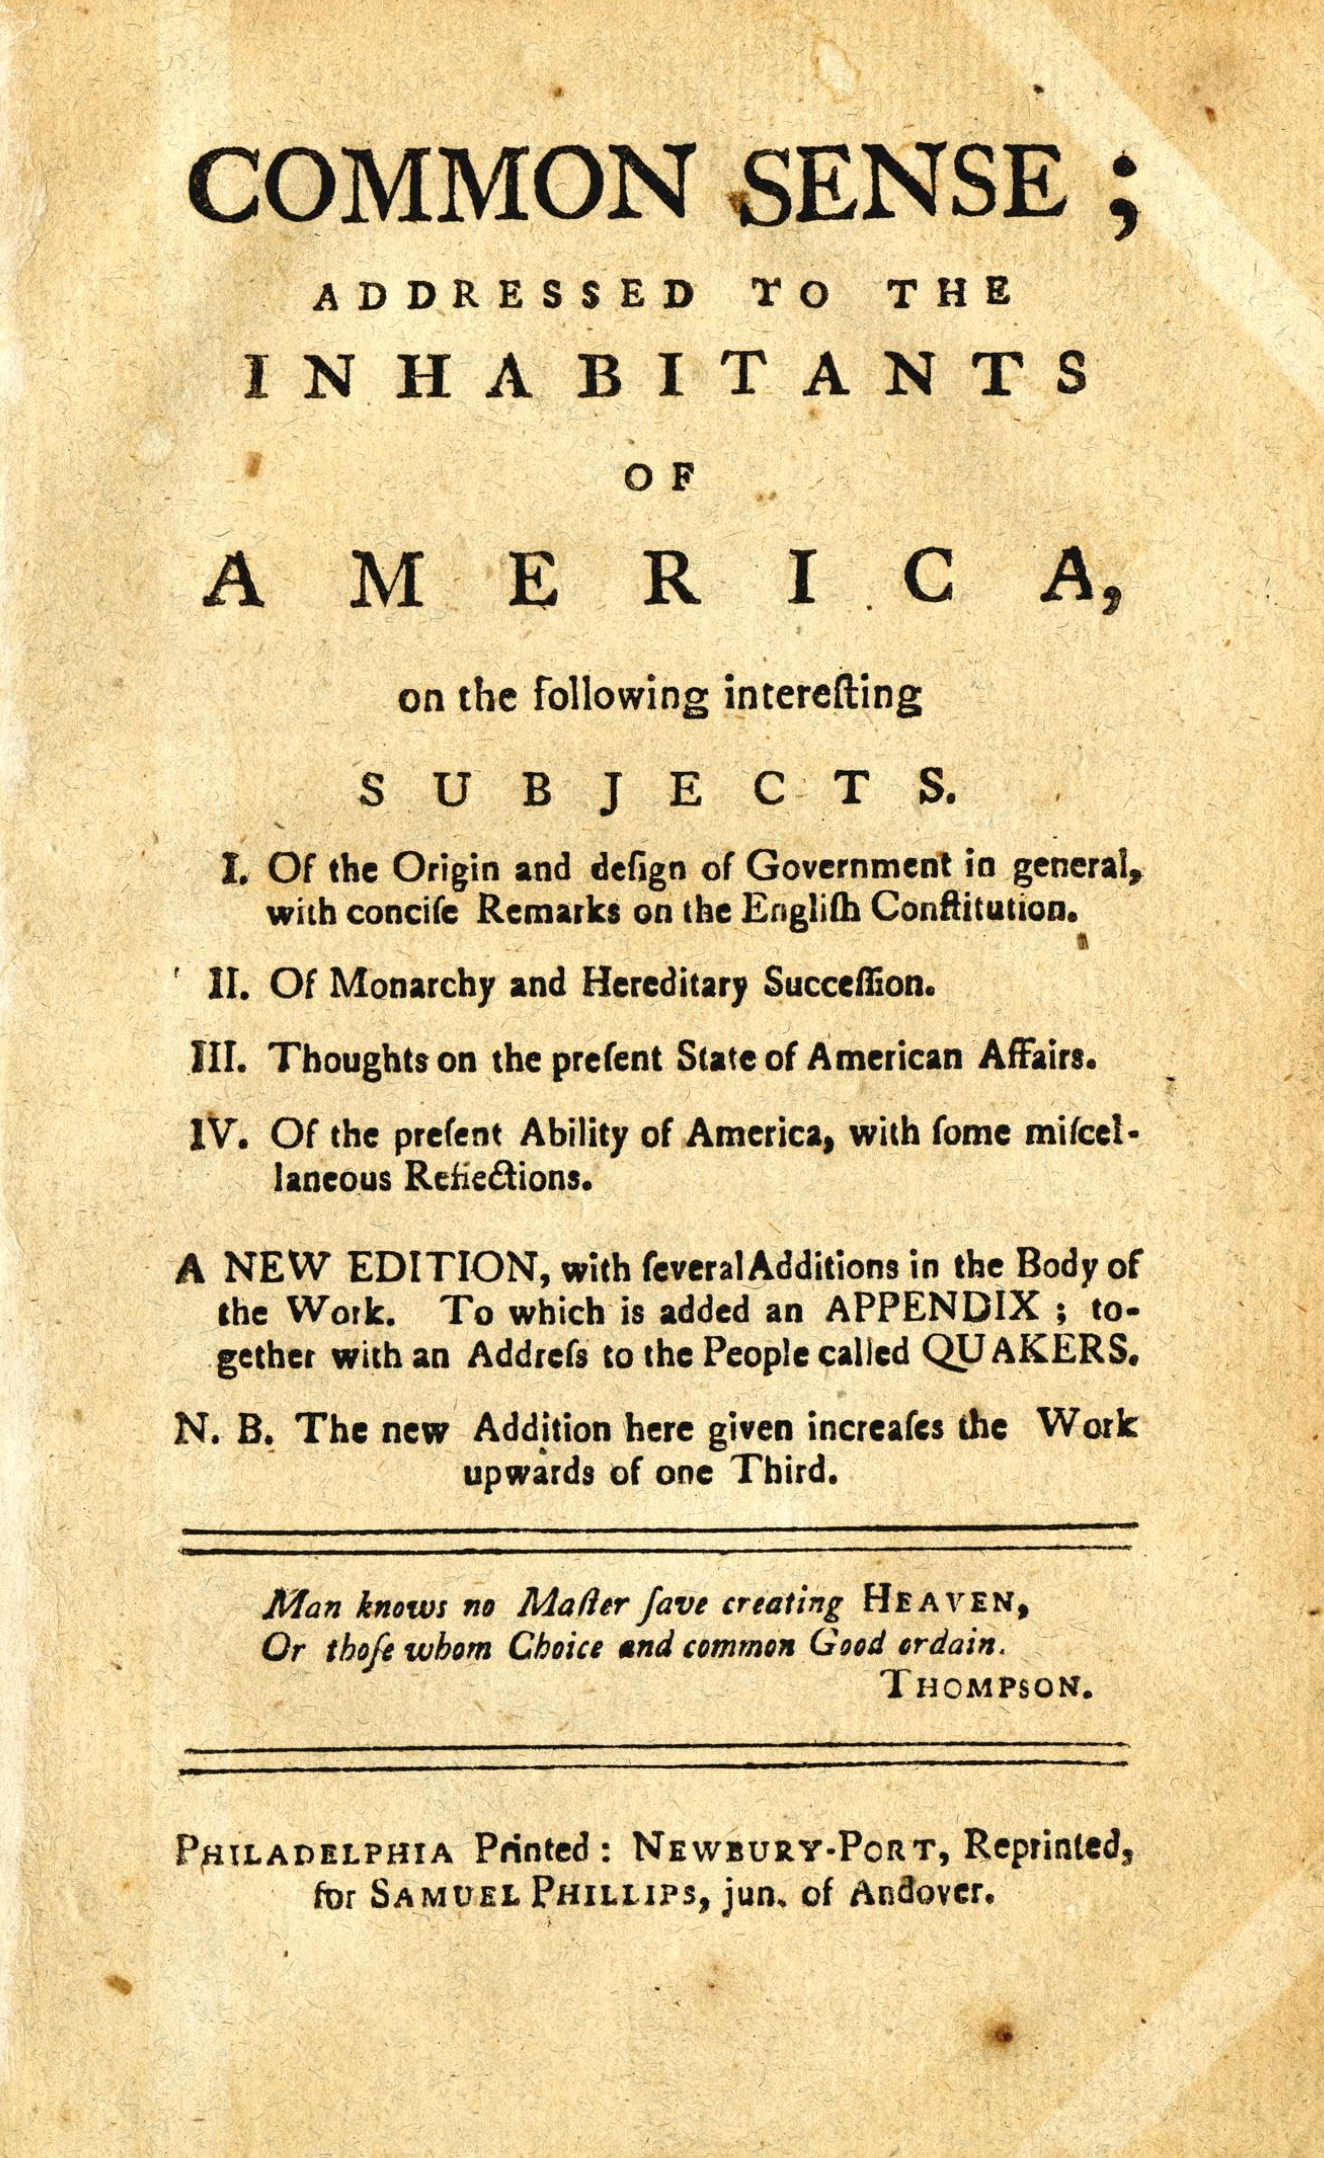 The title page of a book by Thomas Paine, printed in Philadelphia by Benjamin Franklin. The book is called "Common Sense Addressed to the Inhabitants of America" and is a new edition with an appendix. The title page is yellowed and has a few stains.